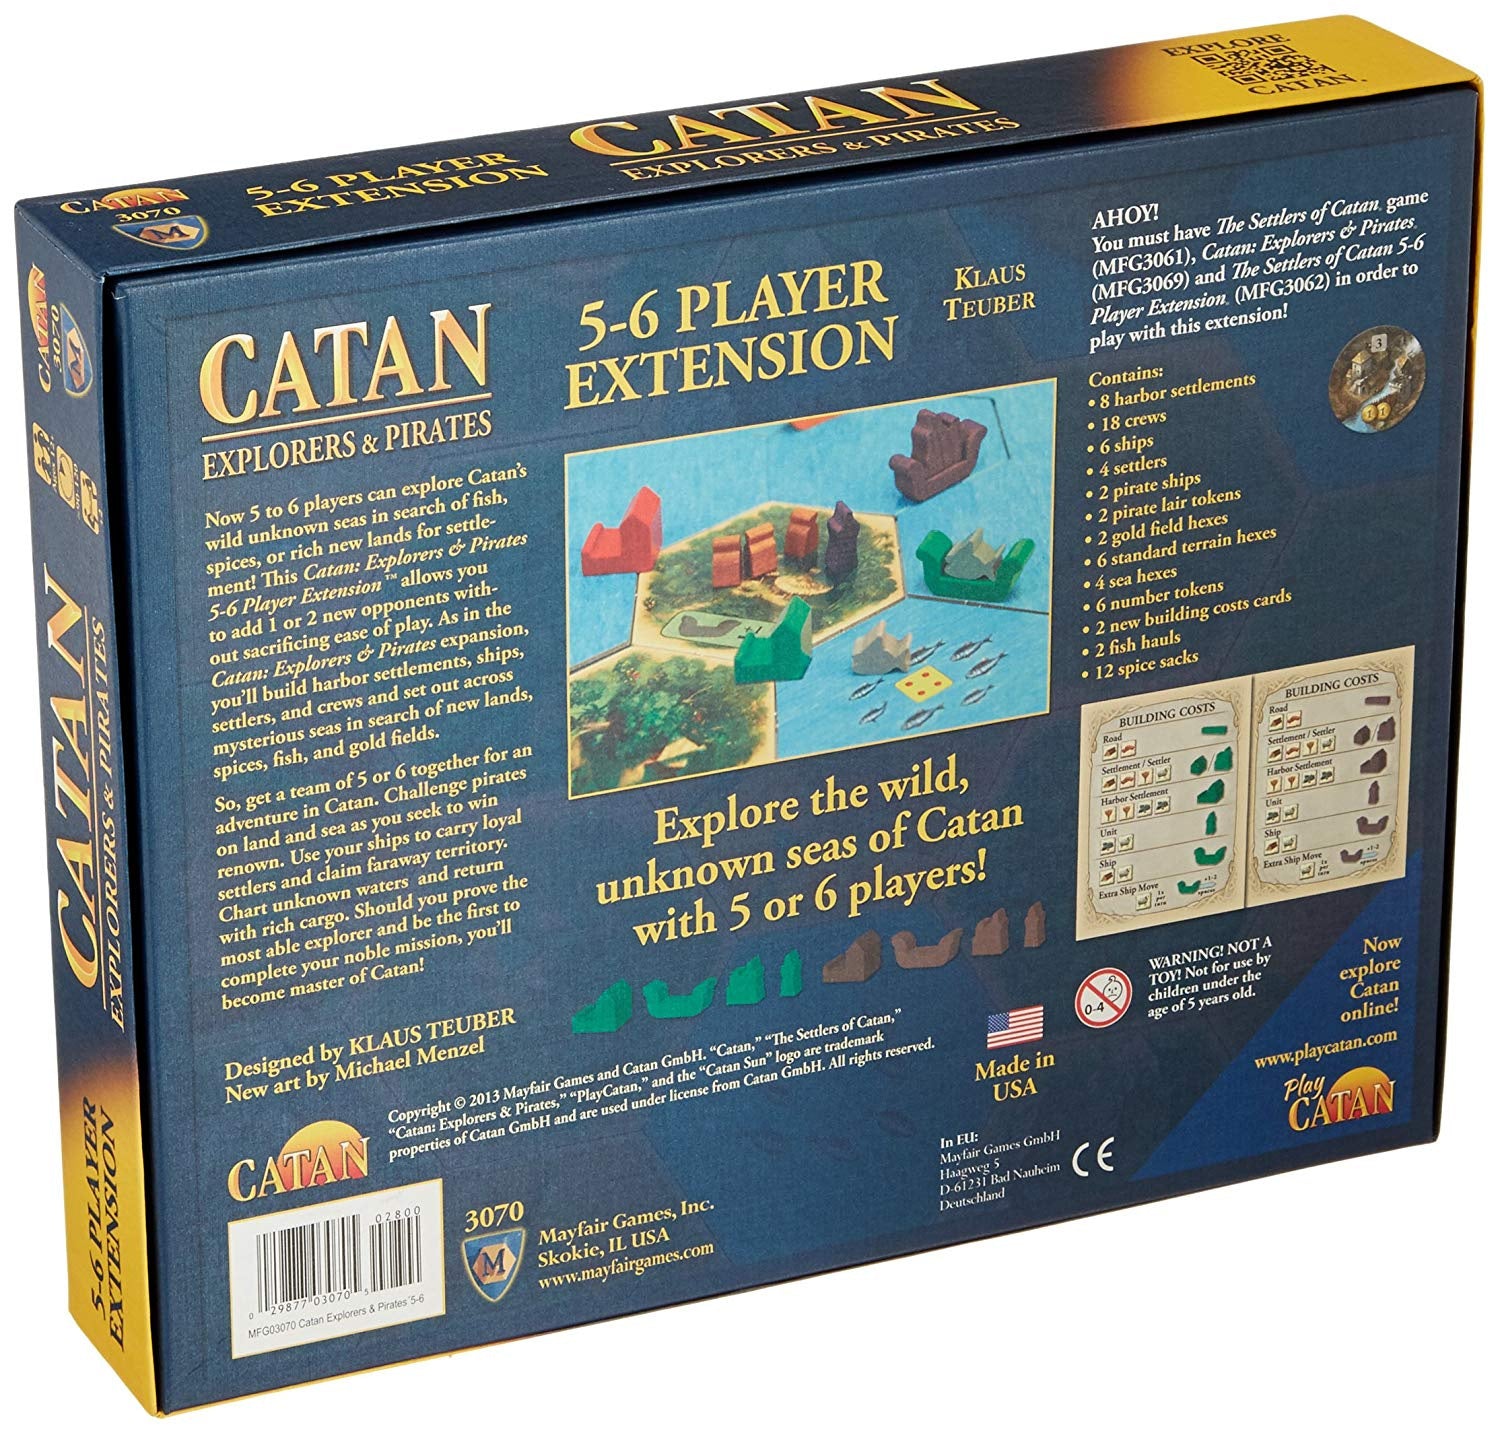 Catan Explorers and Pirates 5-6 Player Extension - Duel Kingdom